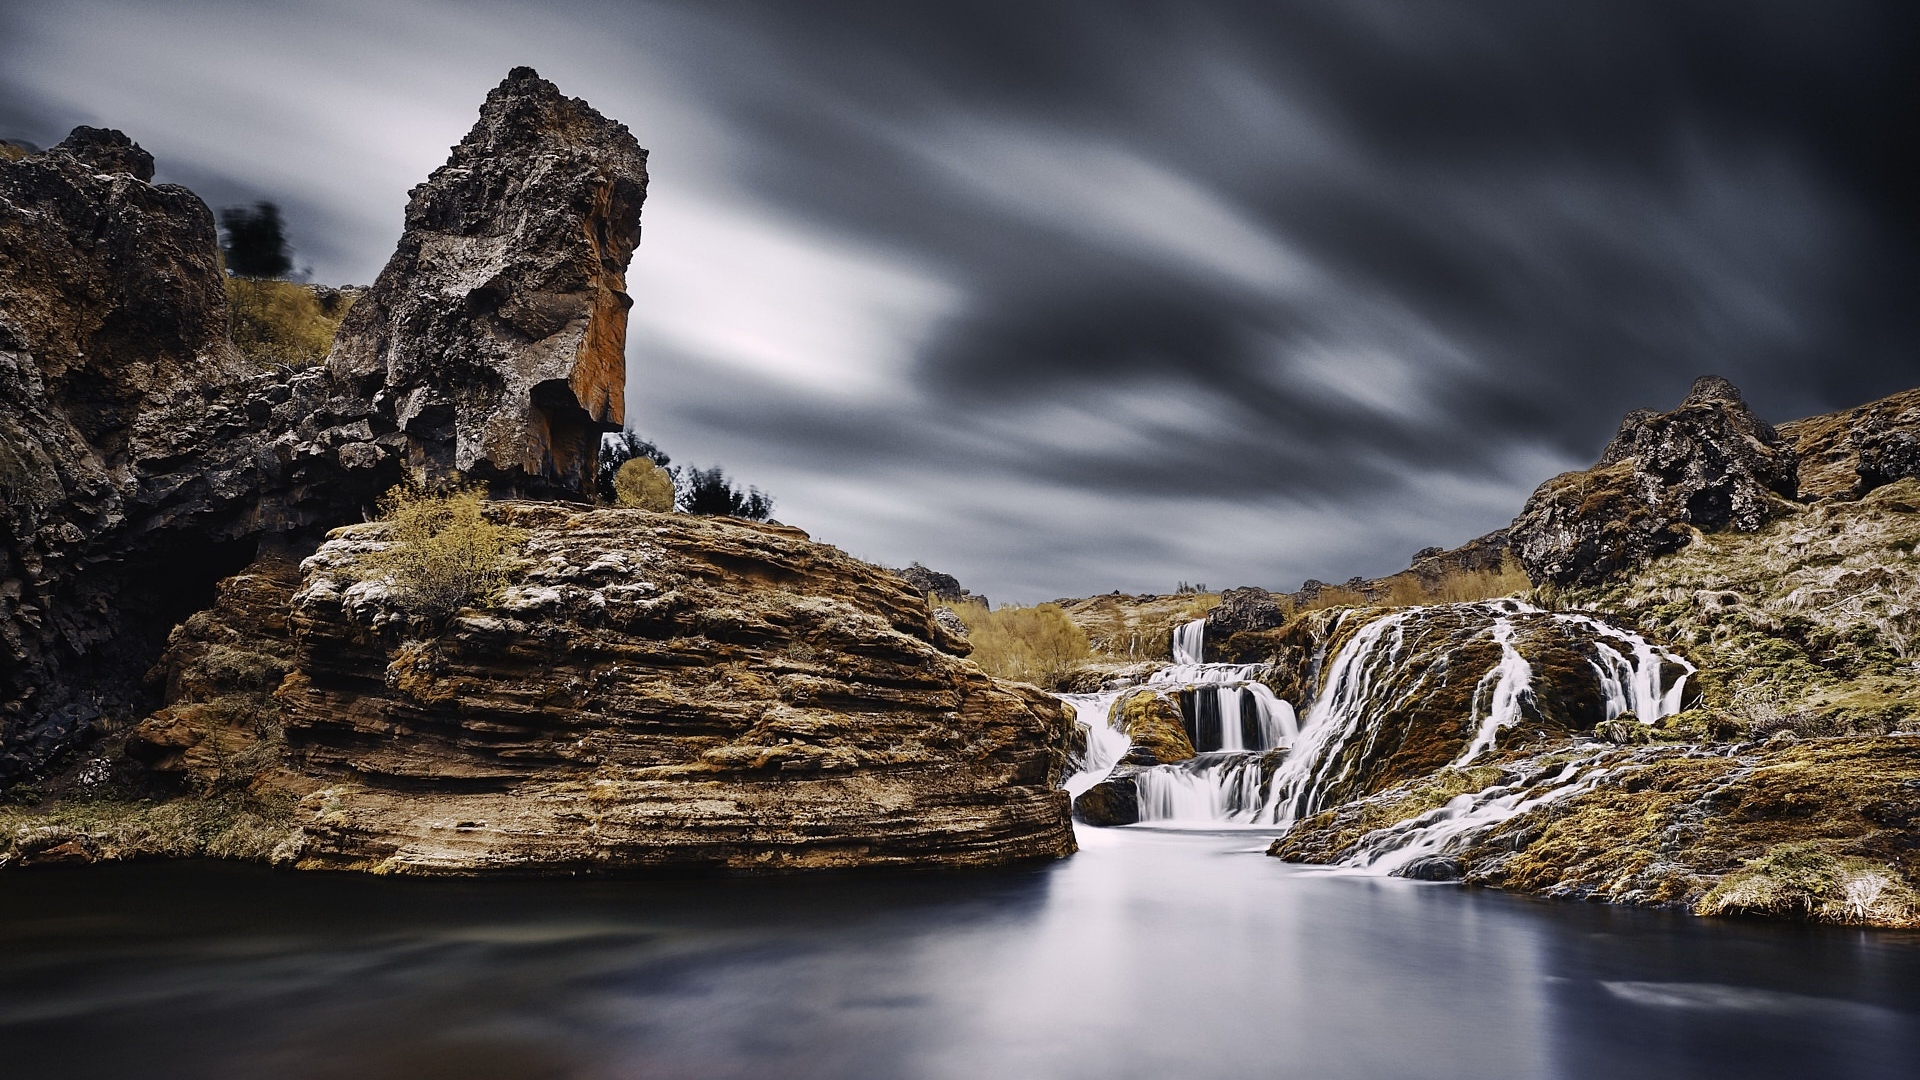 General 1920x1080 nature landscape long exposure clouds waterfall rocks water rock formation Iceland